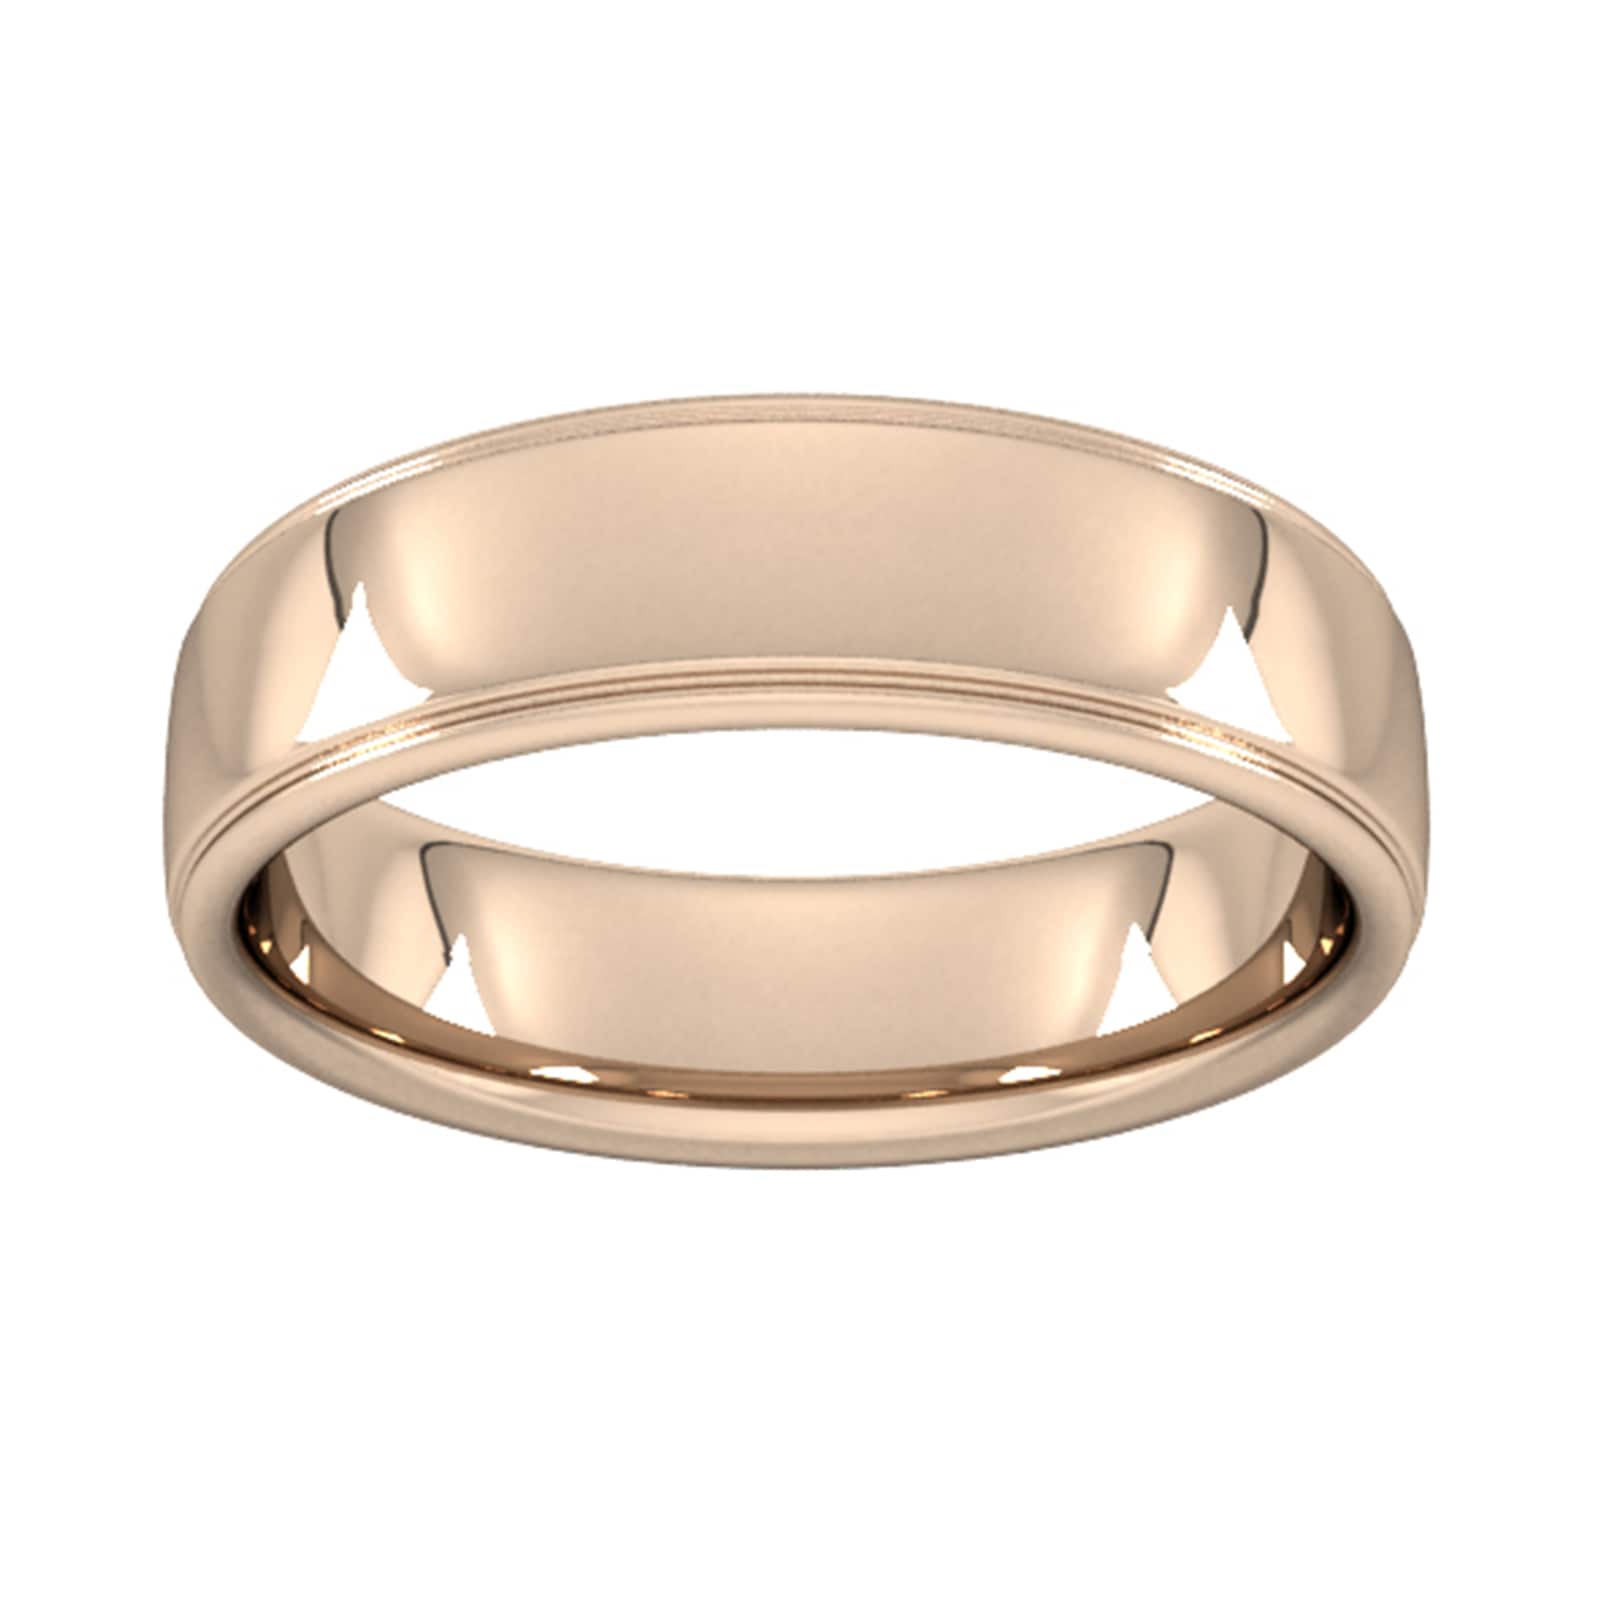 6mm Slight Court Heavy Polished Finish With Grooves Wedding Ring In 18 Carat Rose Gold - Ring Size L